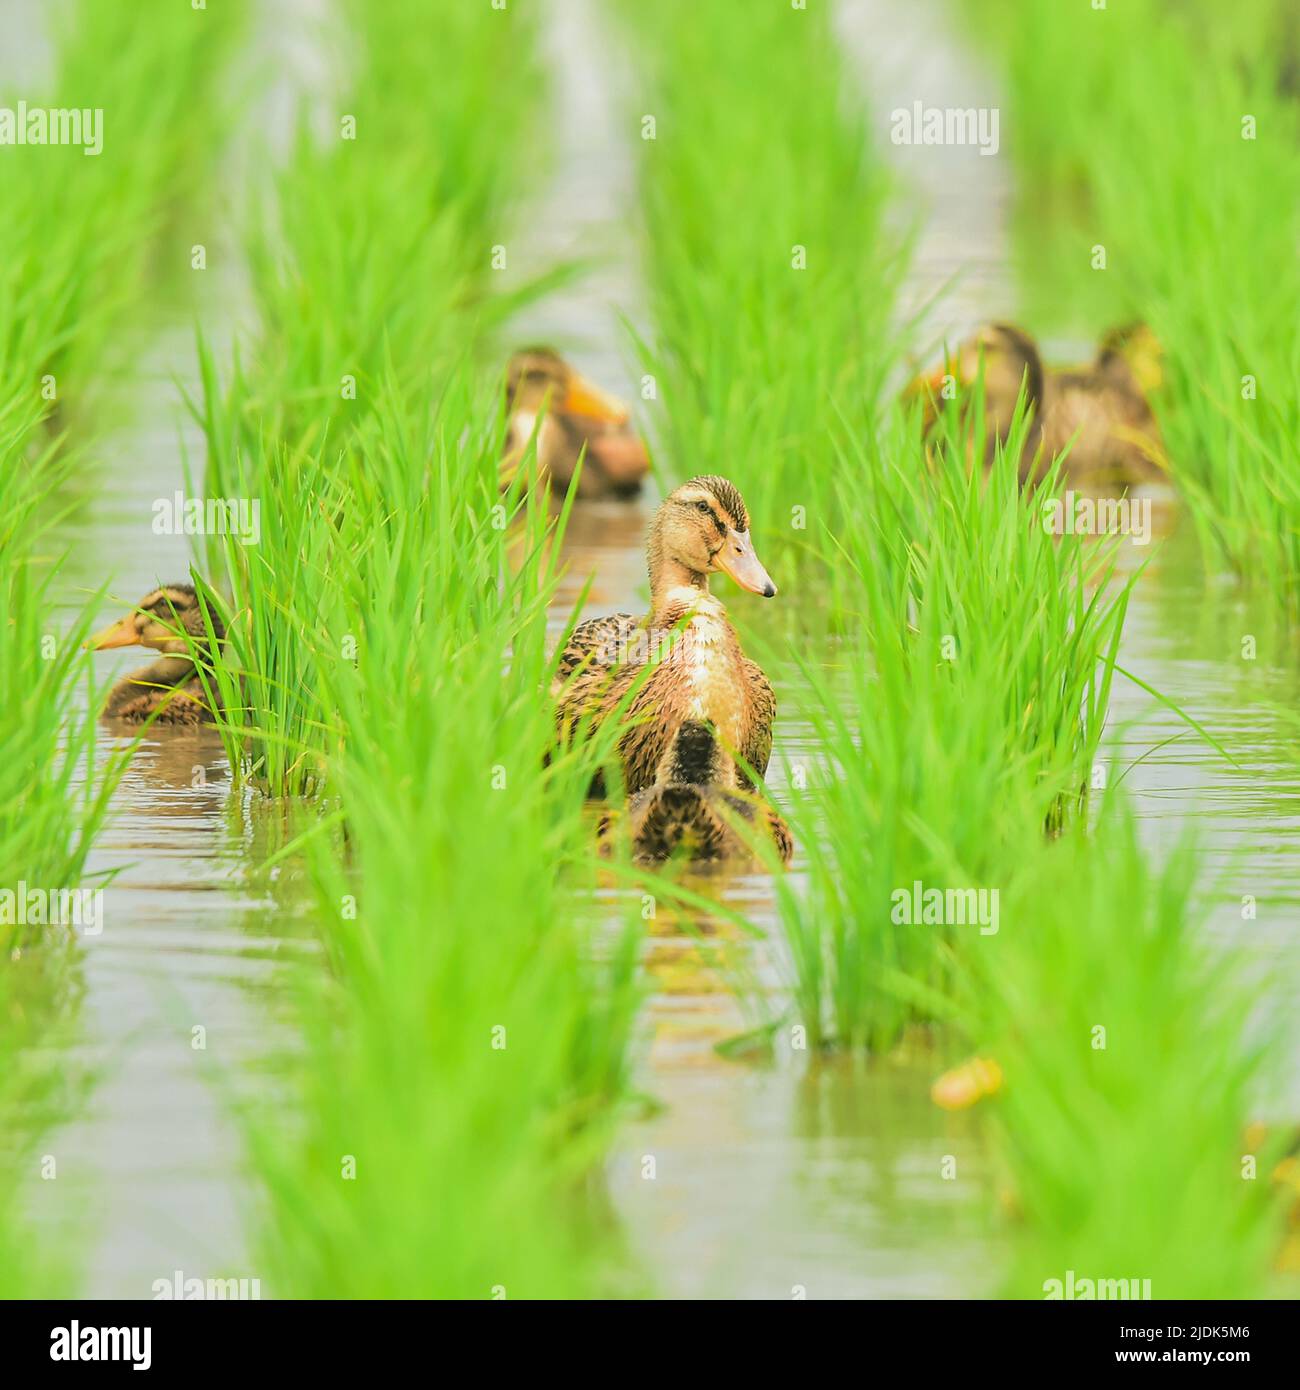 WUCHANG, CHINA - JUNE 18, 2020 -Ducks and crabs are seen in a paddy field in Wuchang, Heilongjiang province, June 18, 2020. Stock Photo